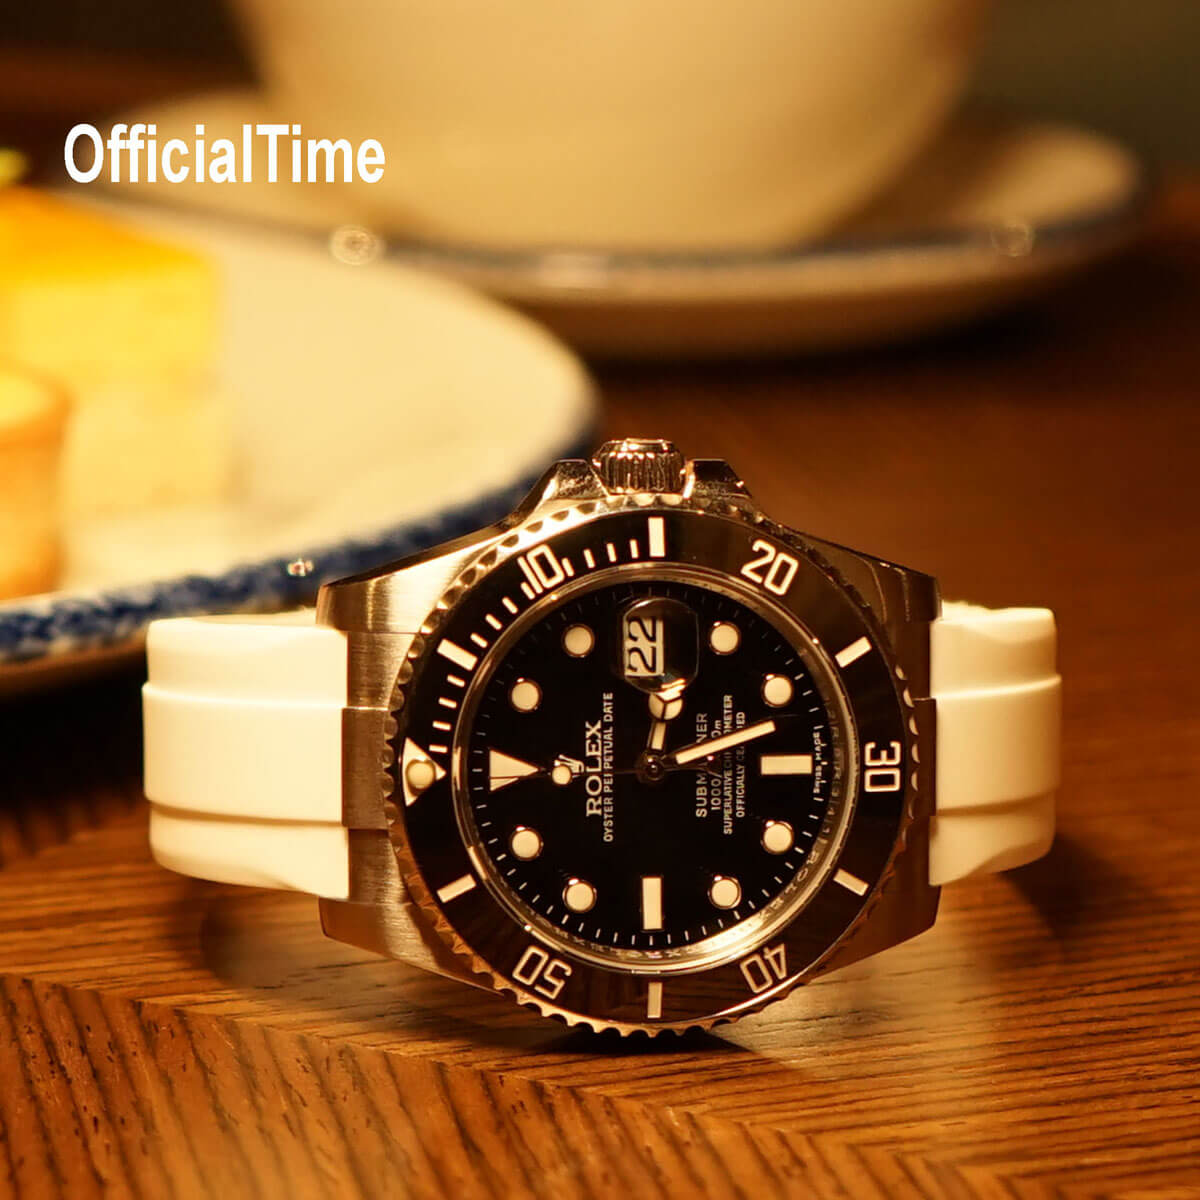 Submariner Style OfficialTime Rubber Strap